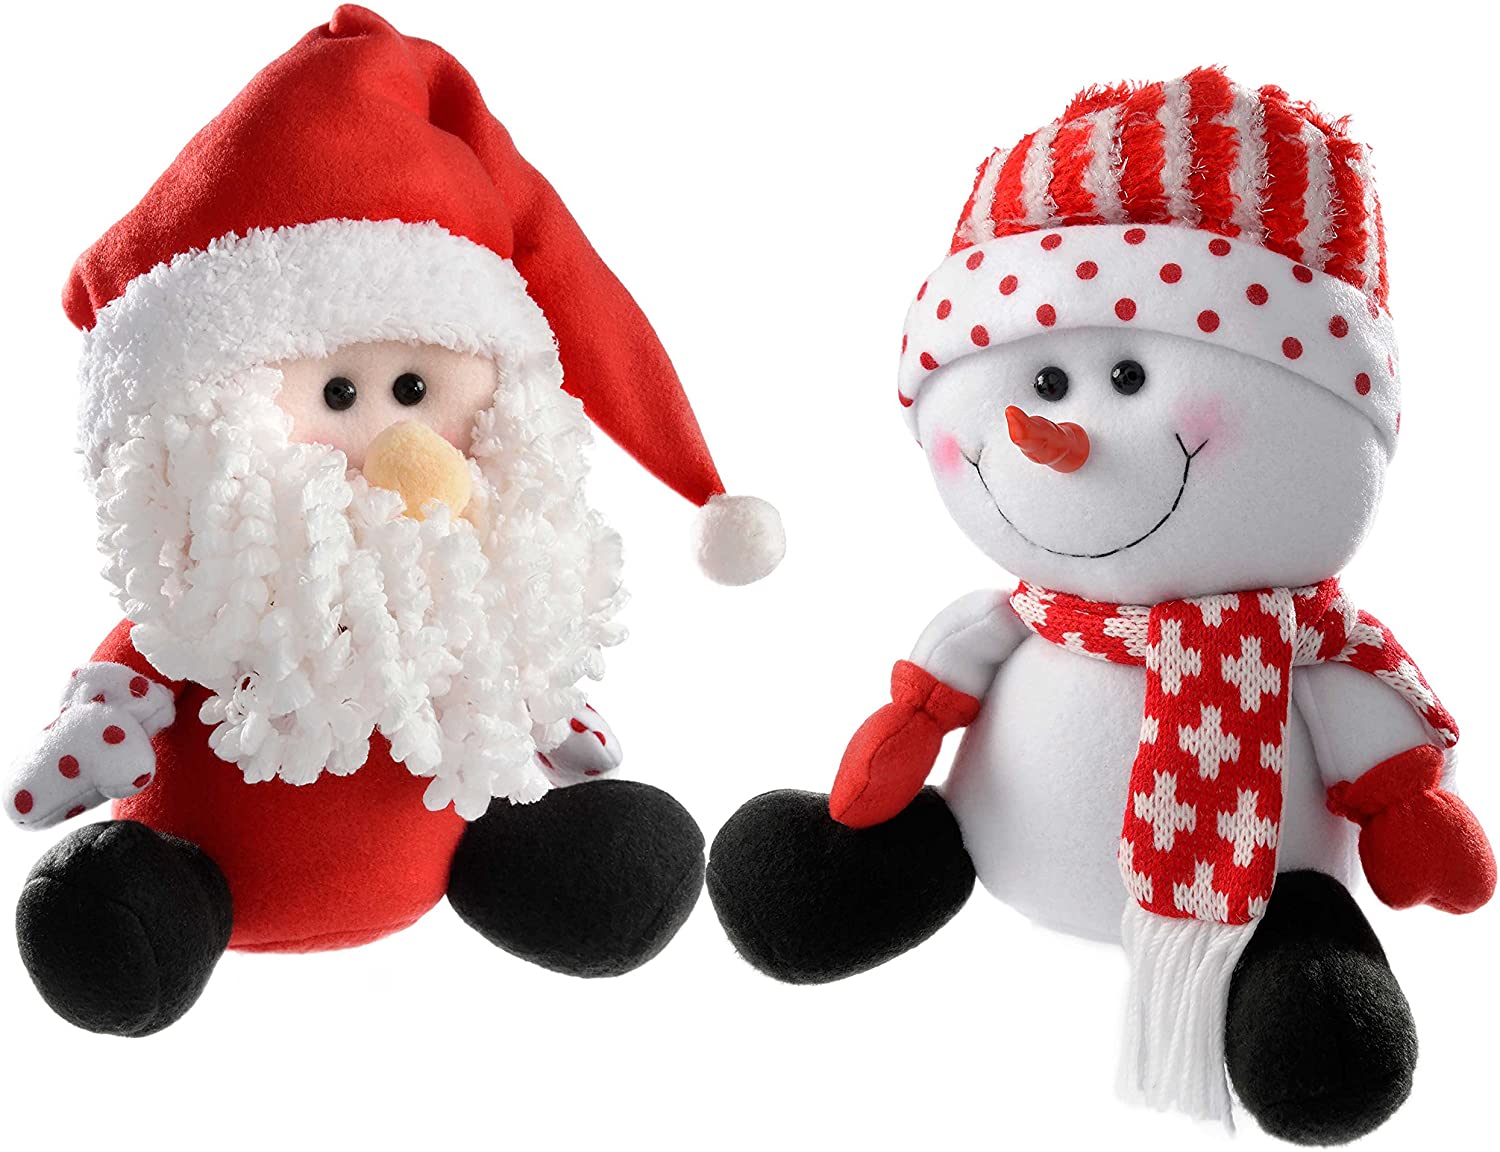 WeRChristmas 25 cm Sitting Santa and Snowman, Set of 2, Red/White